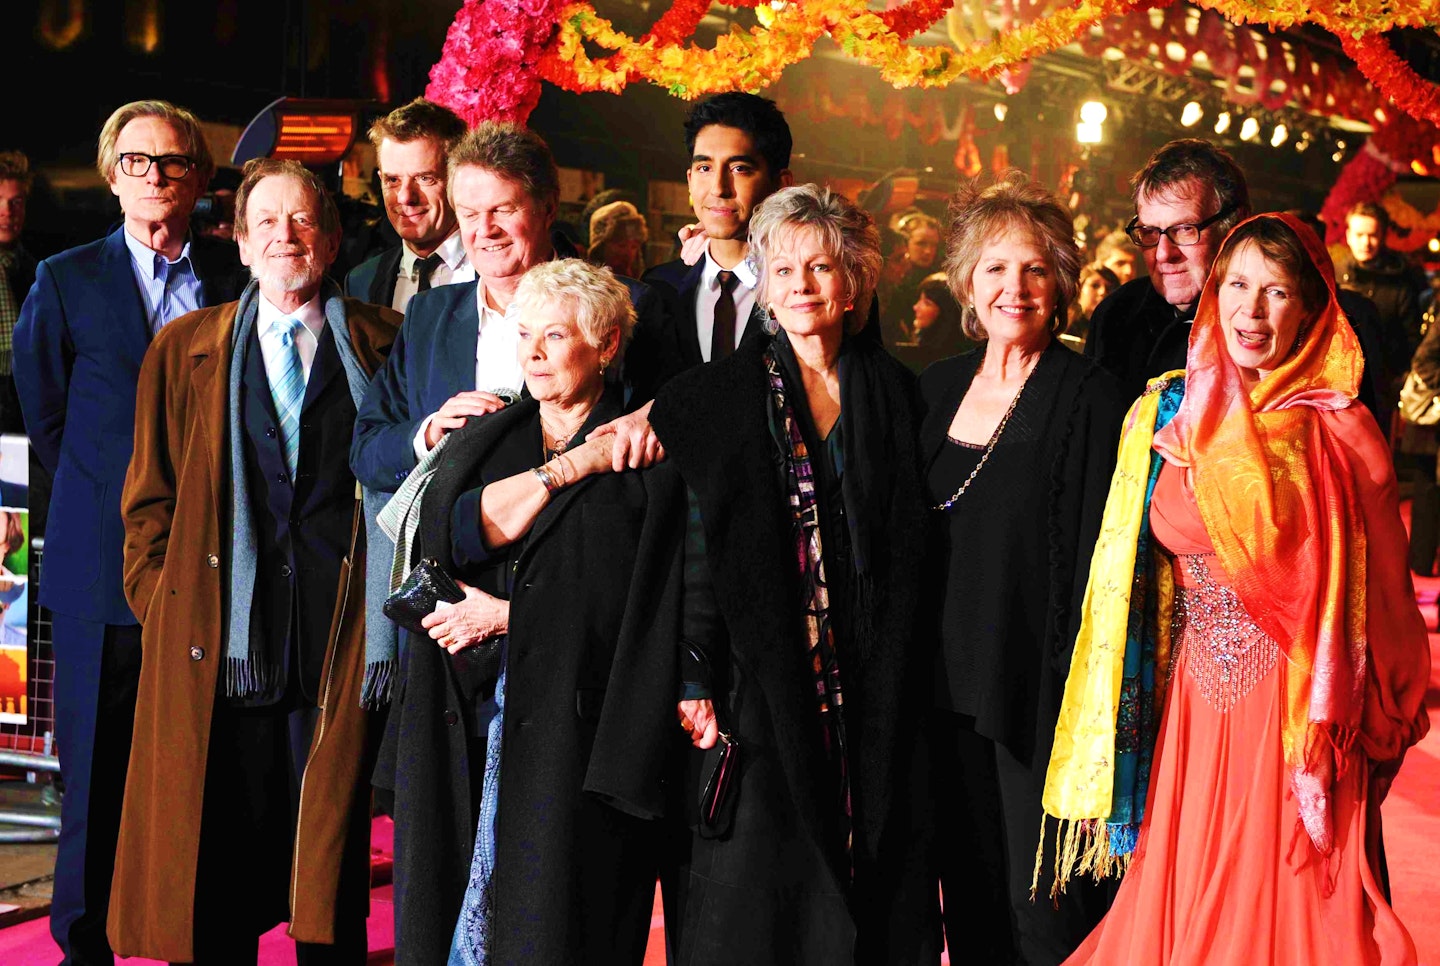 Best Exotic Marigold Hotel 2 In The Works